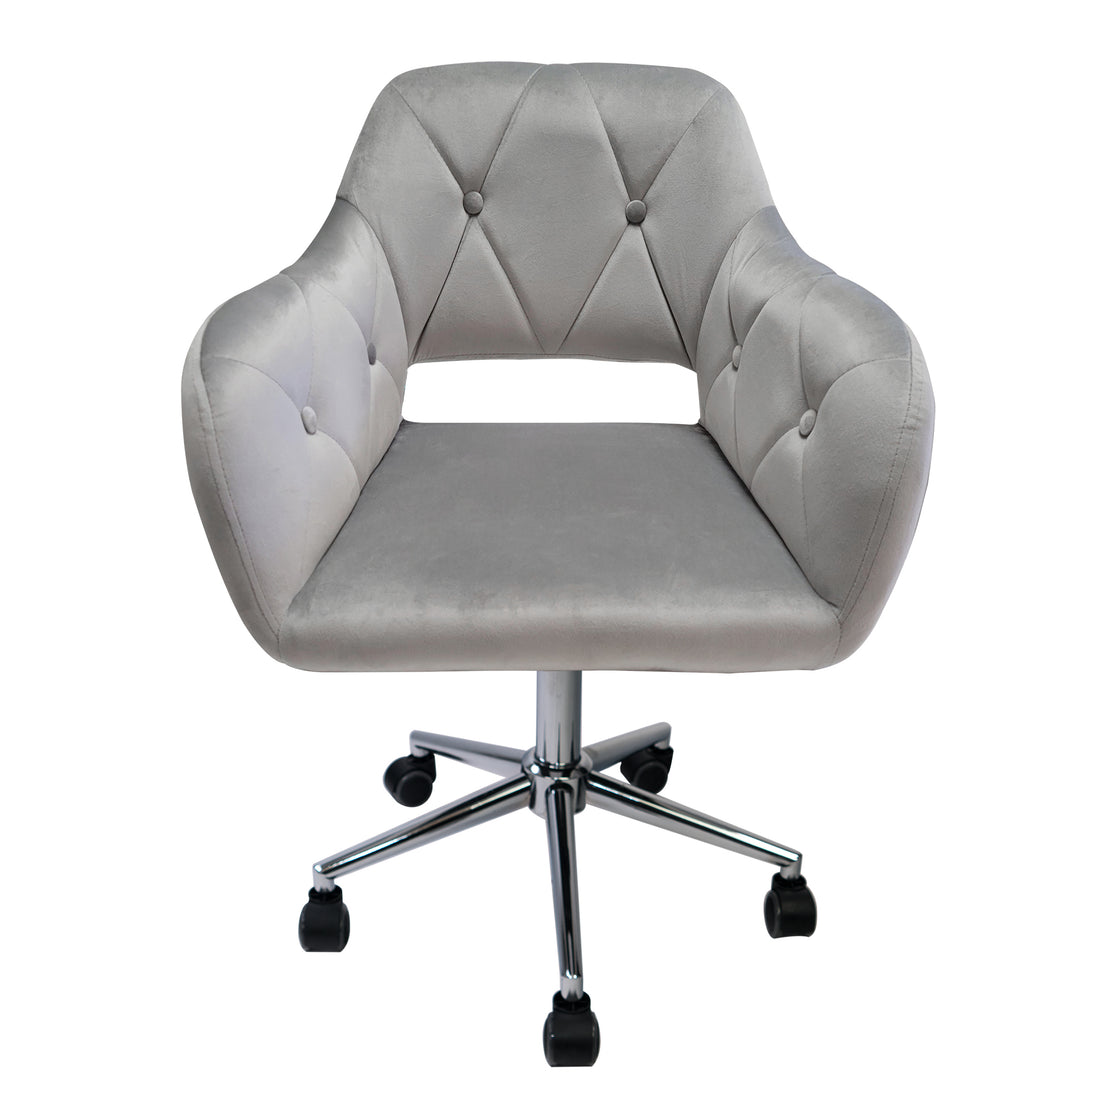 Brittney Tufted Leatherette Vanity Chair